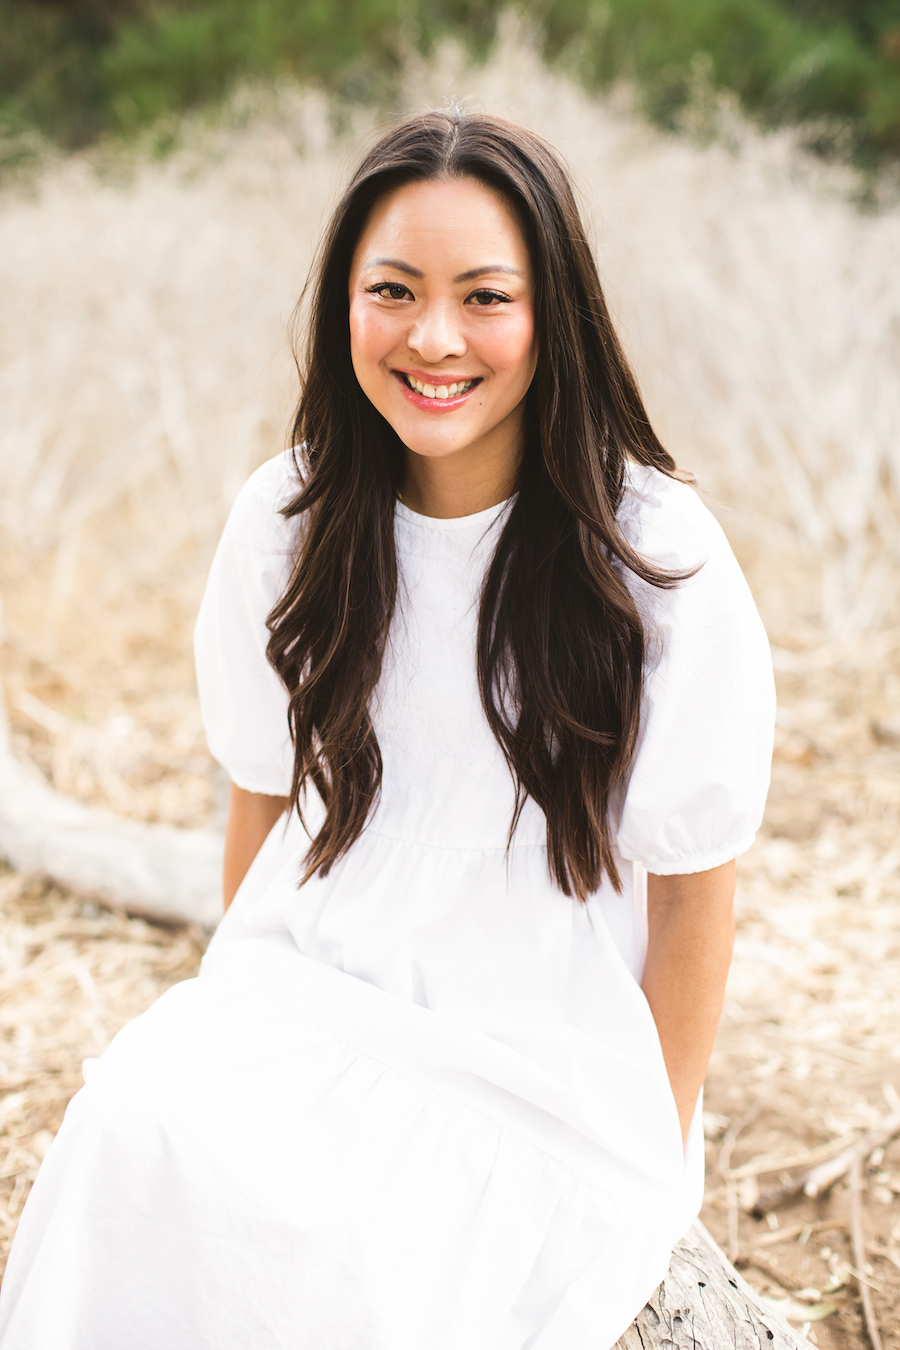 Suffering From Sensitive Skin - Amy Liu, Founder of Tower 28